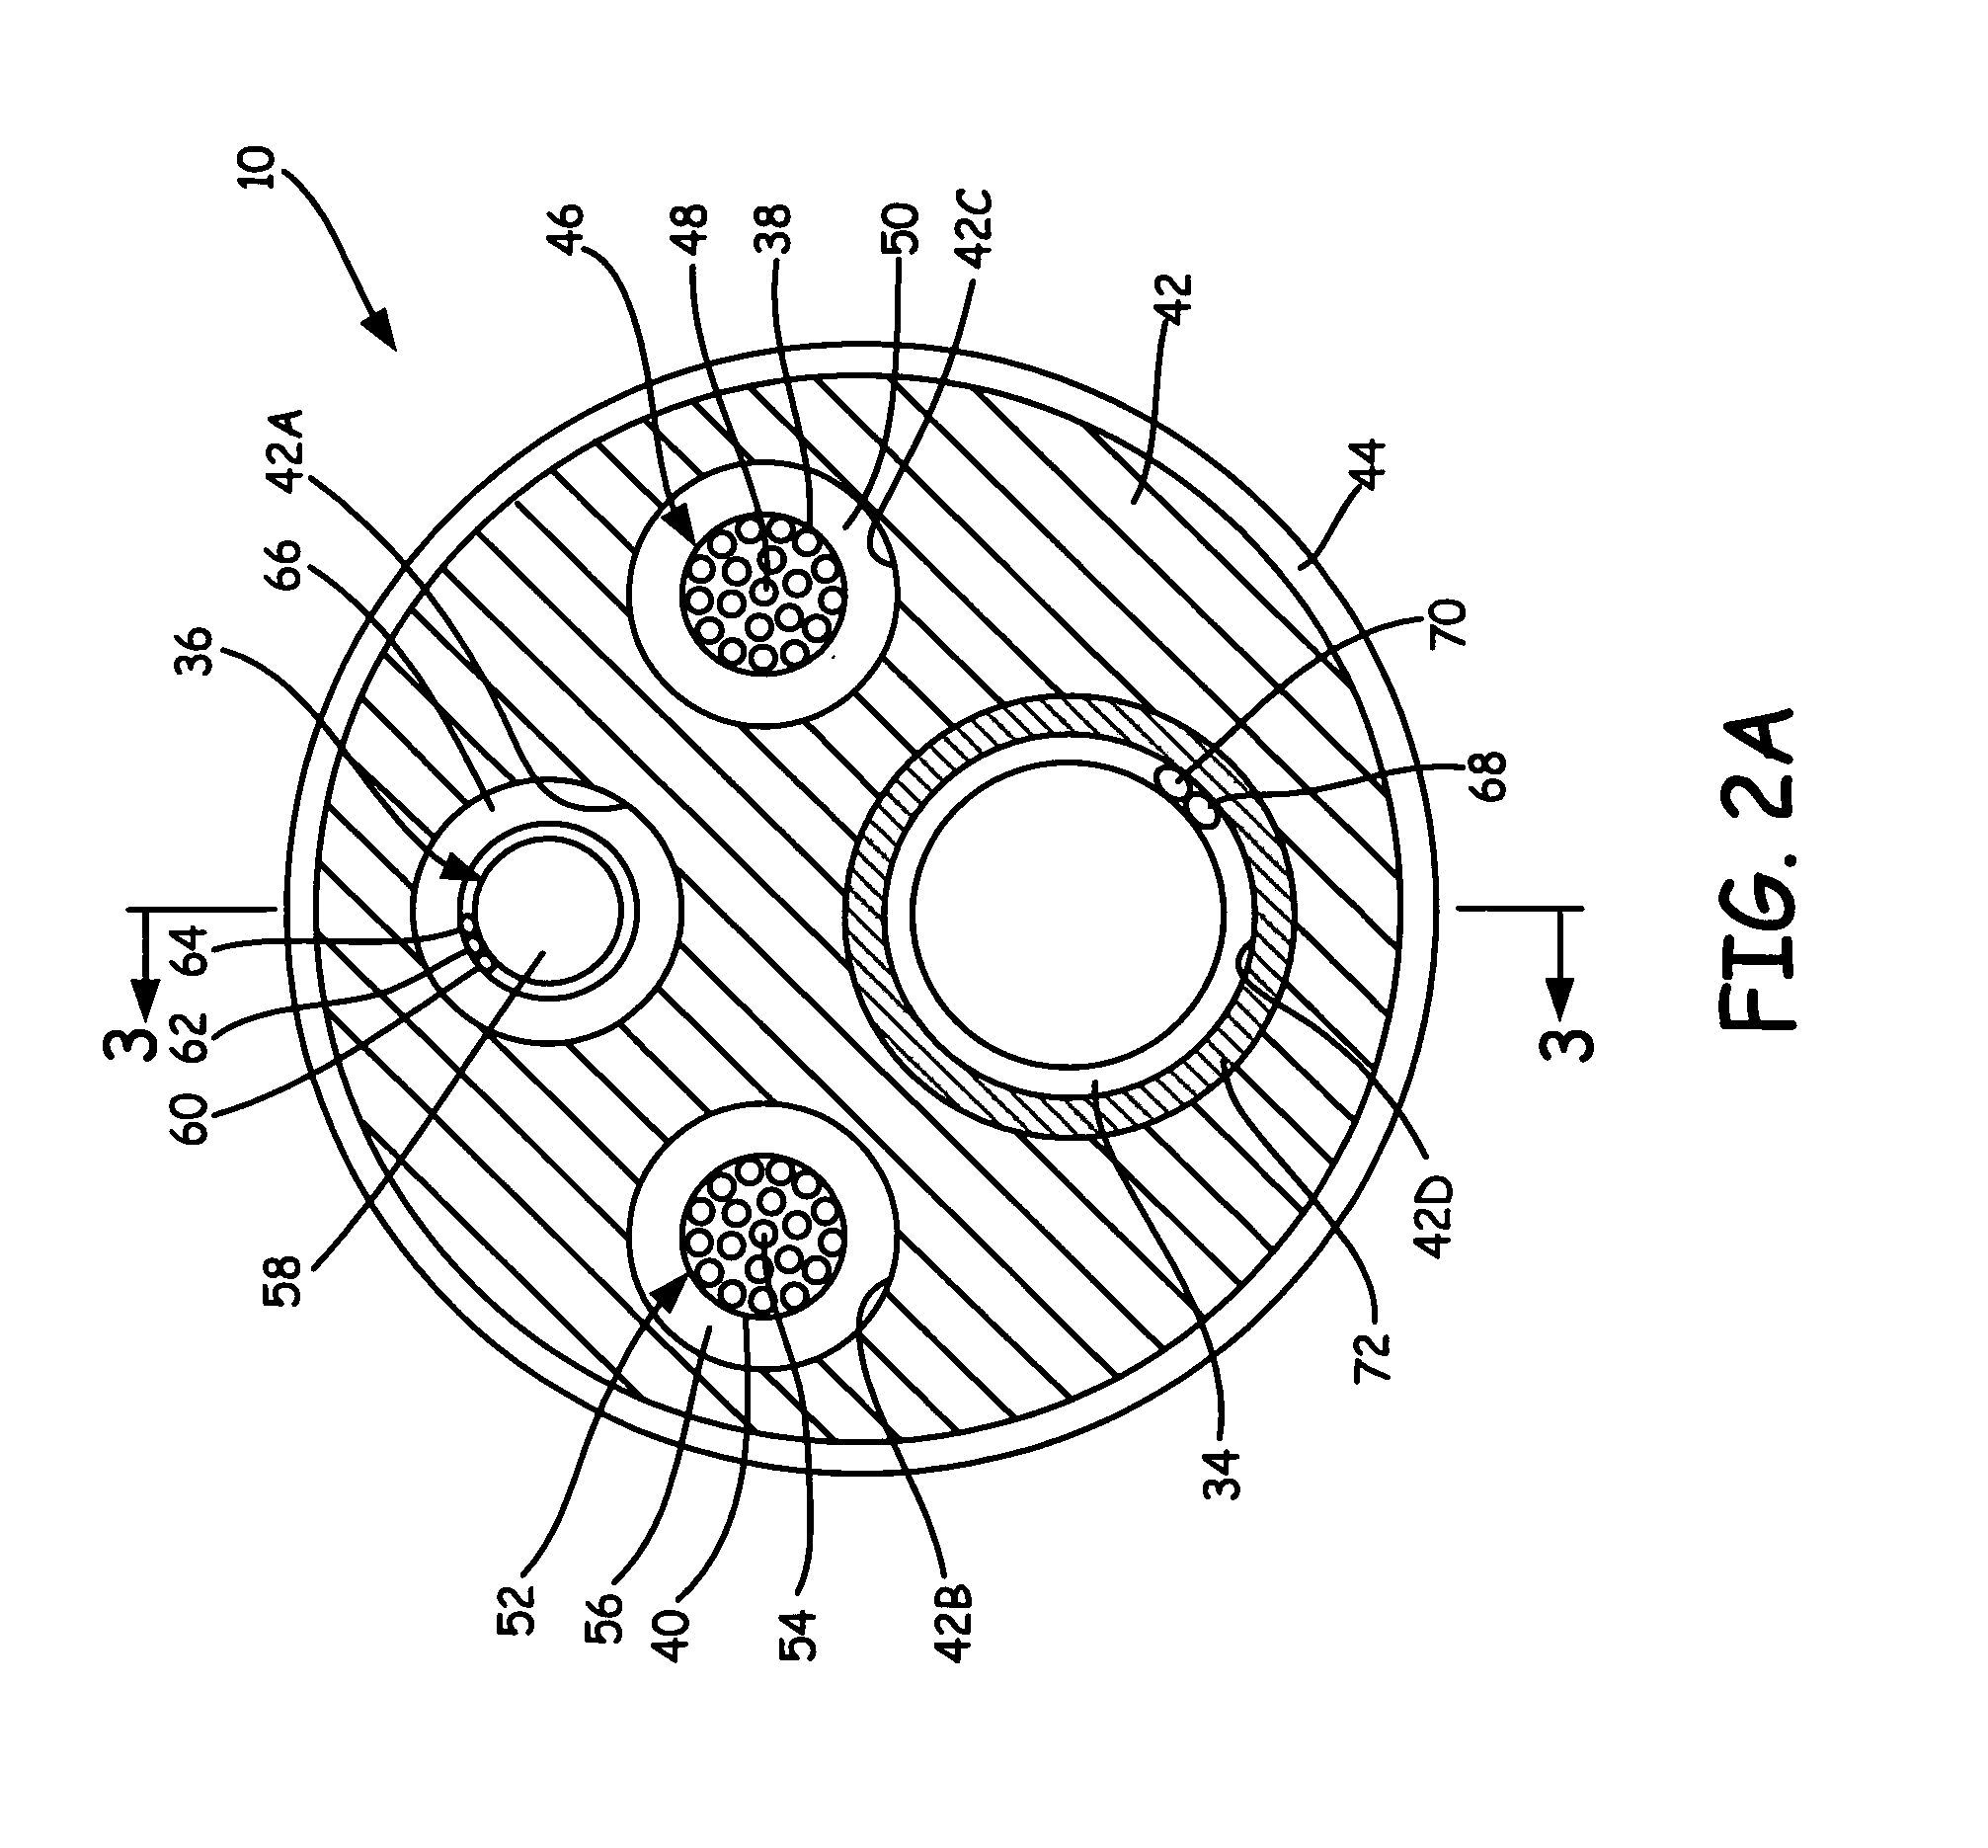 Polymer reinforced coil conductor for torque transmission